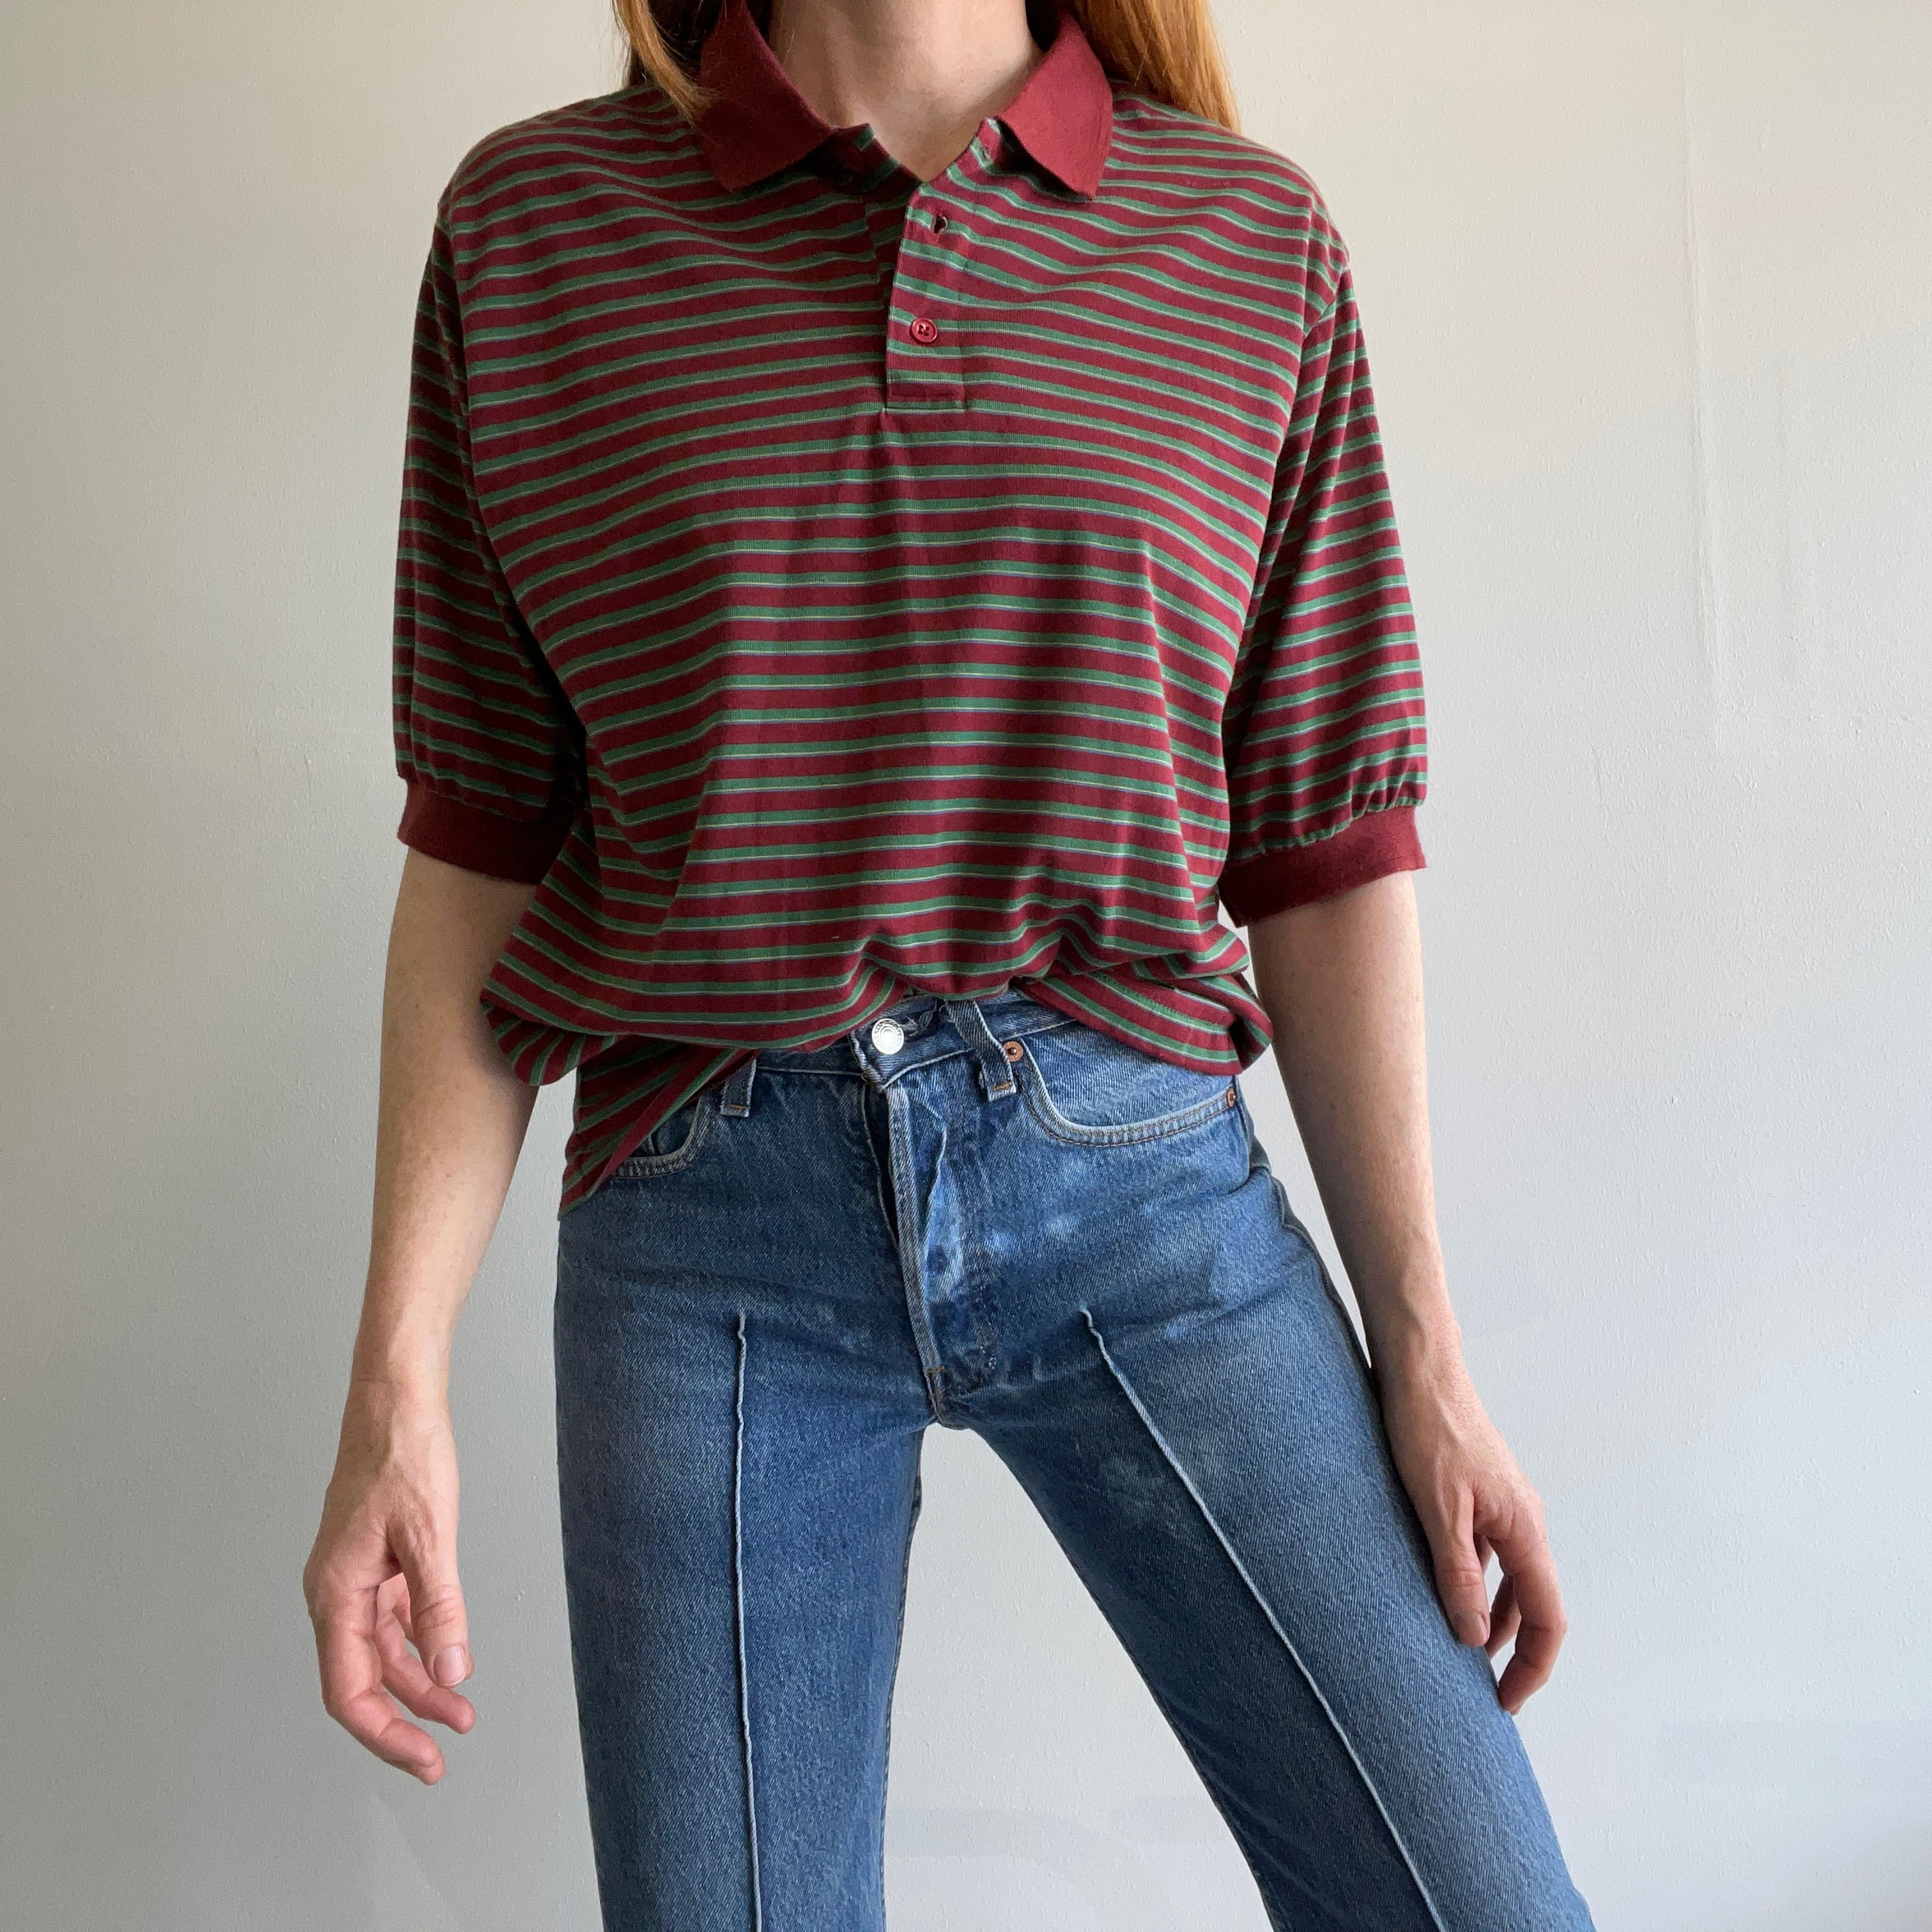 1980/90s Burgundy and Green Striped Polo Shirt